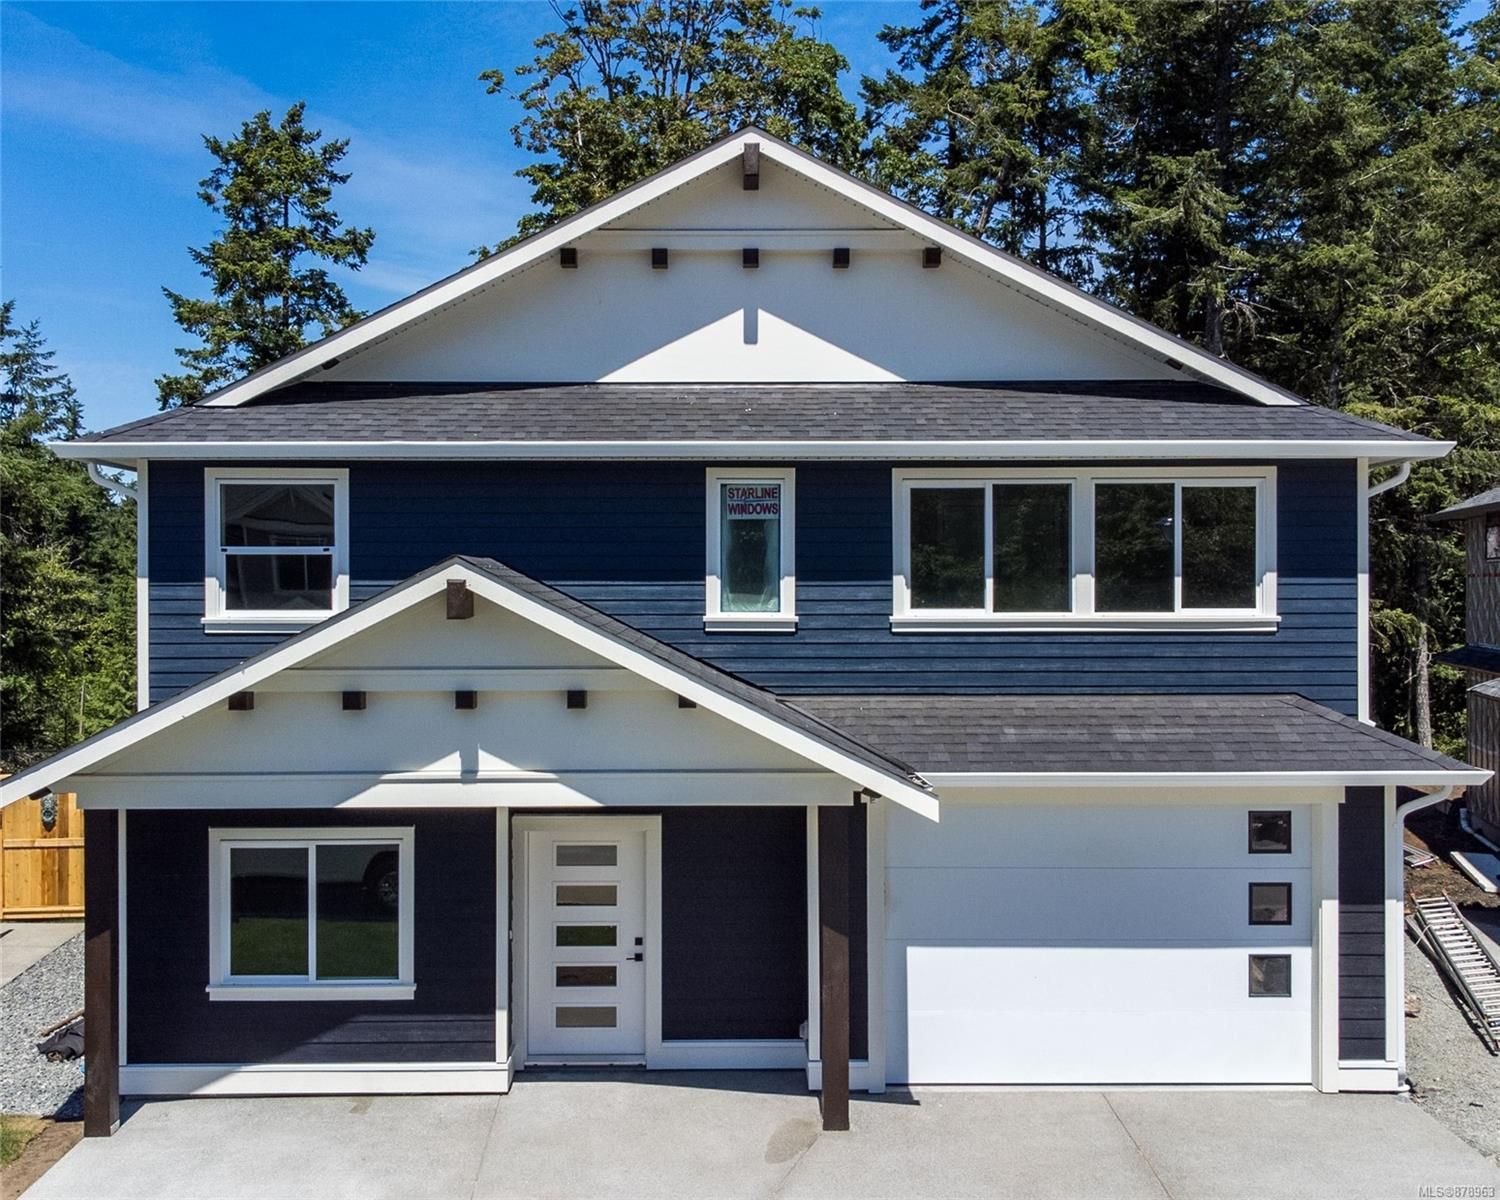 New property listed in La Olympic View, Langford